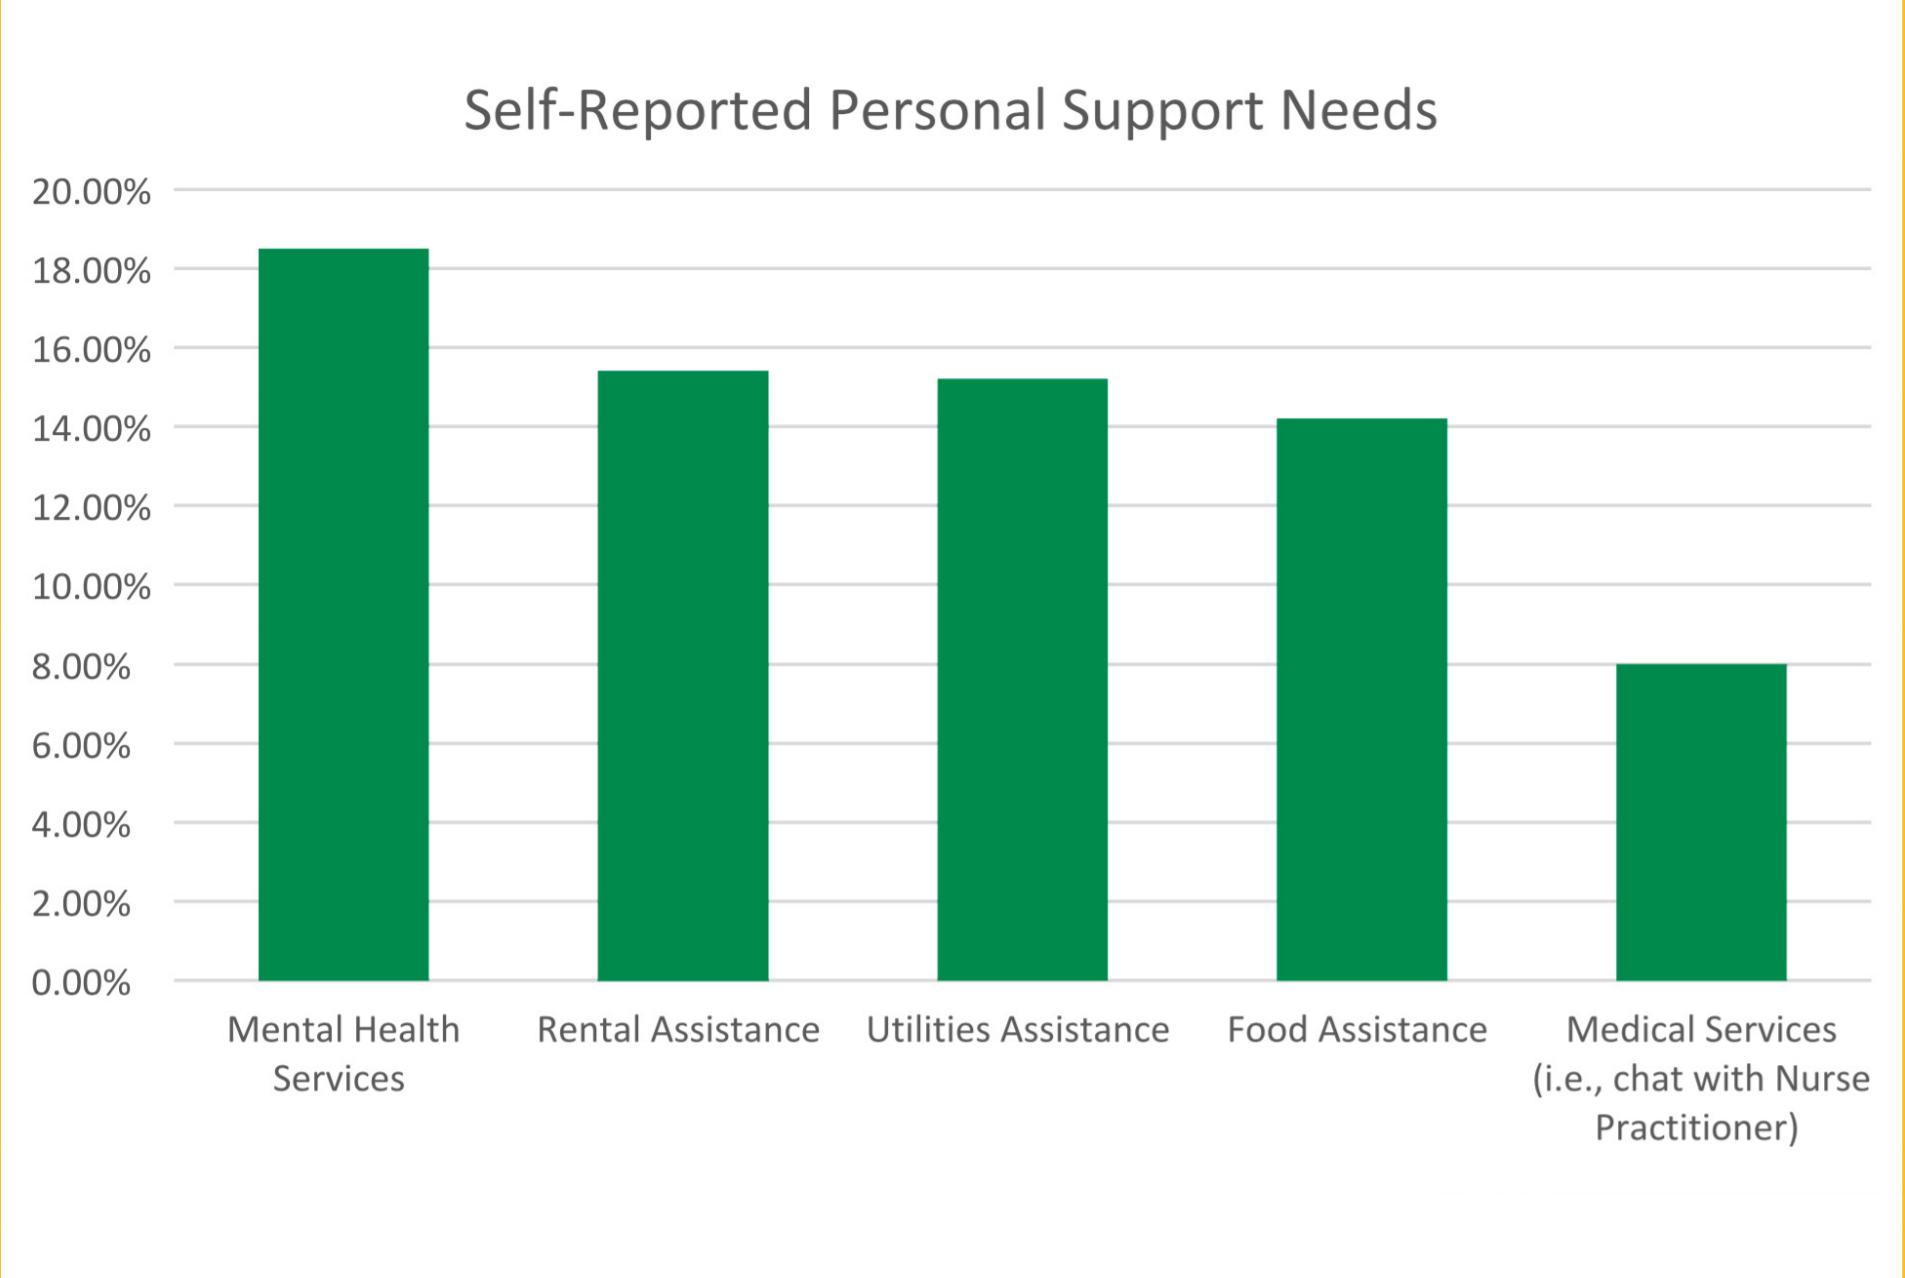 Student Needs Survey Graph showing more than 18% needing Mental Health Services, more than 15% needing Rental Services, more than 15% for Utilities Assistance, more than 14% for Food Assistance, and about 8% for Medical Services (i.e. chat with Nurse Pra)